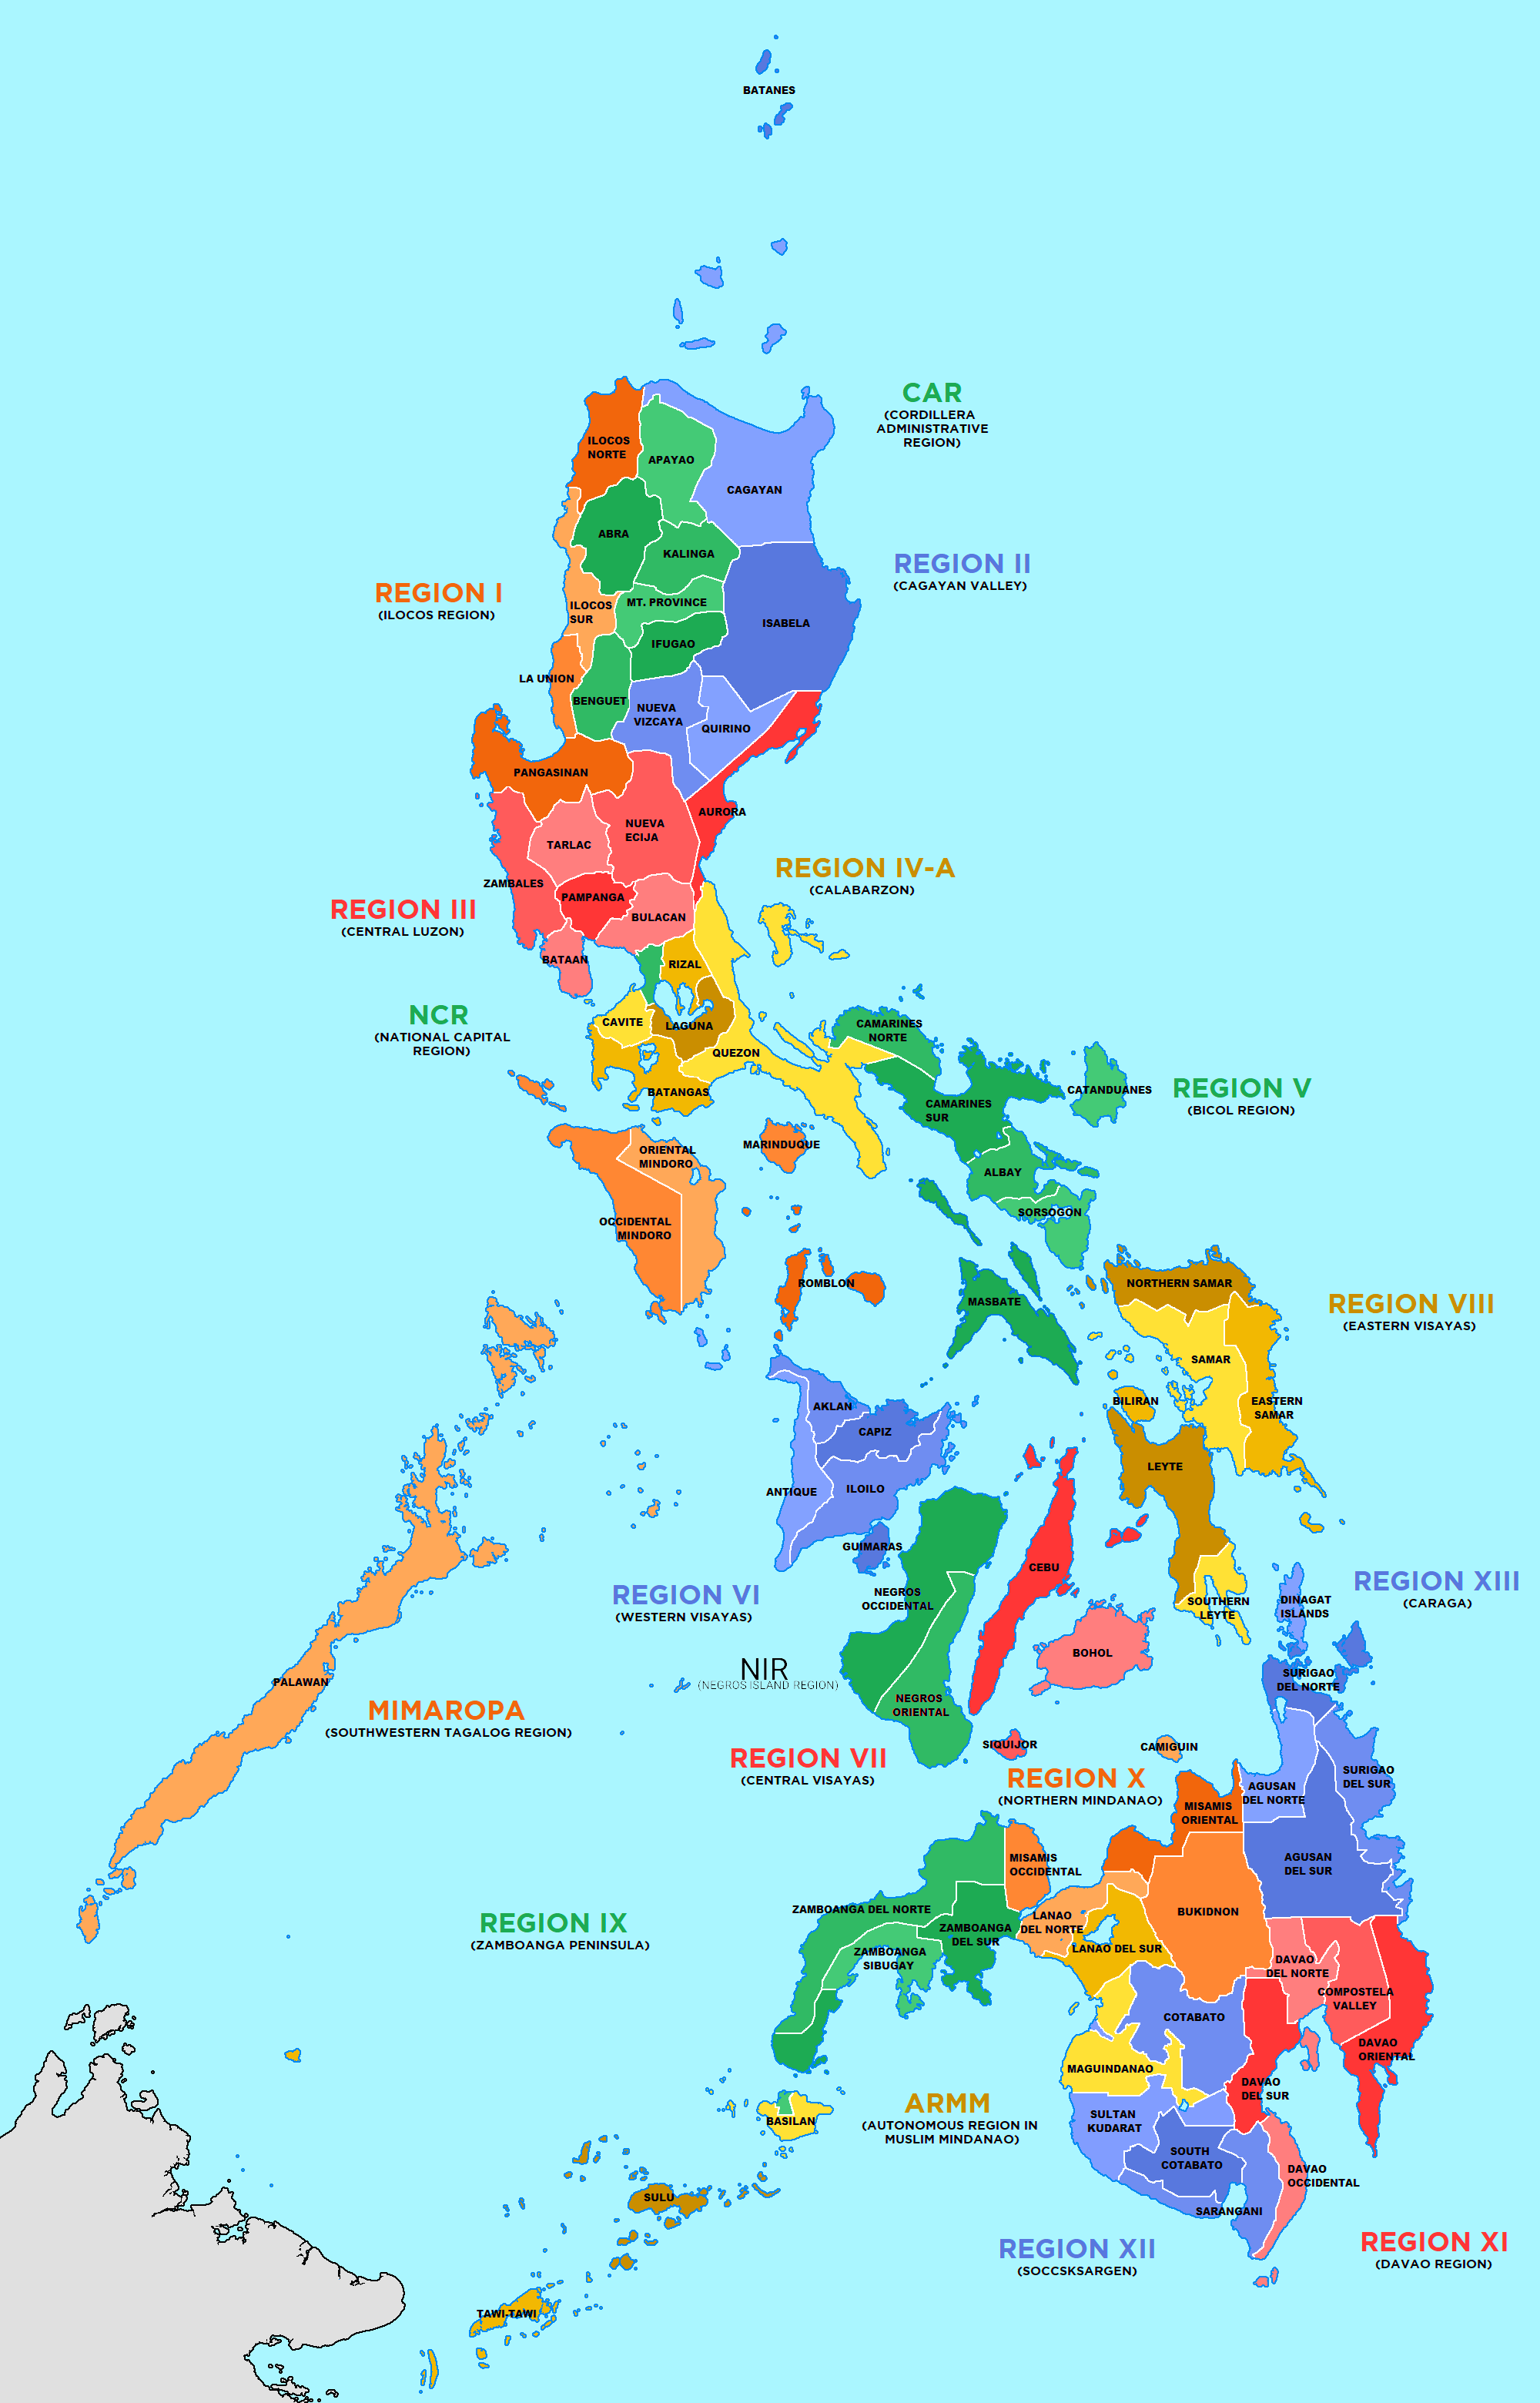 Republic Of The Philippines Maps With Images Philippine Map Images